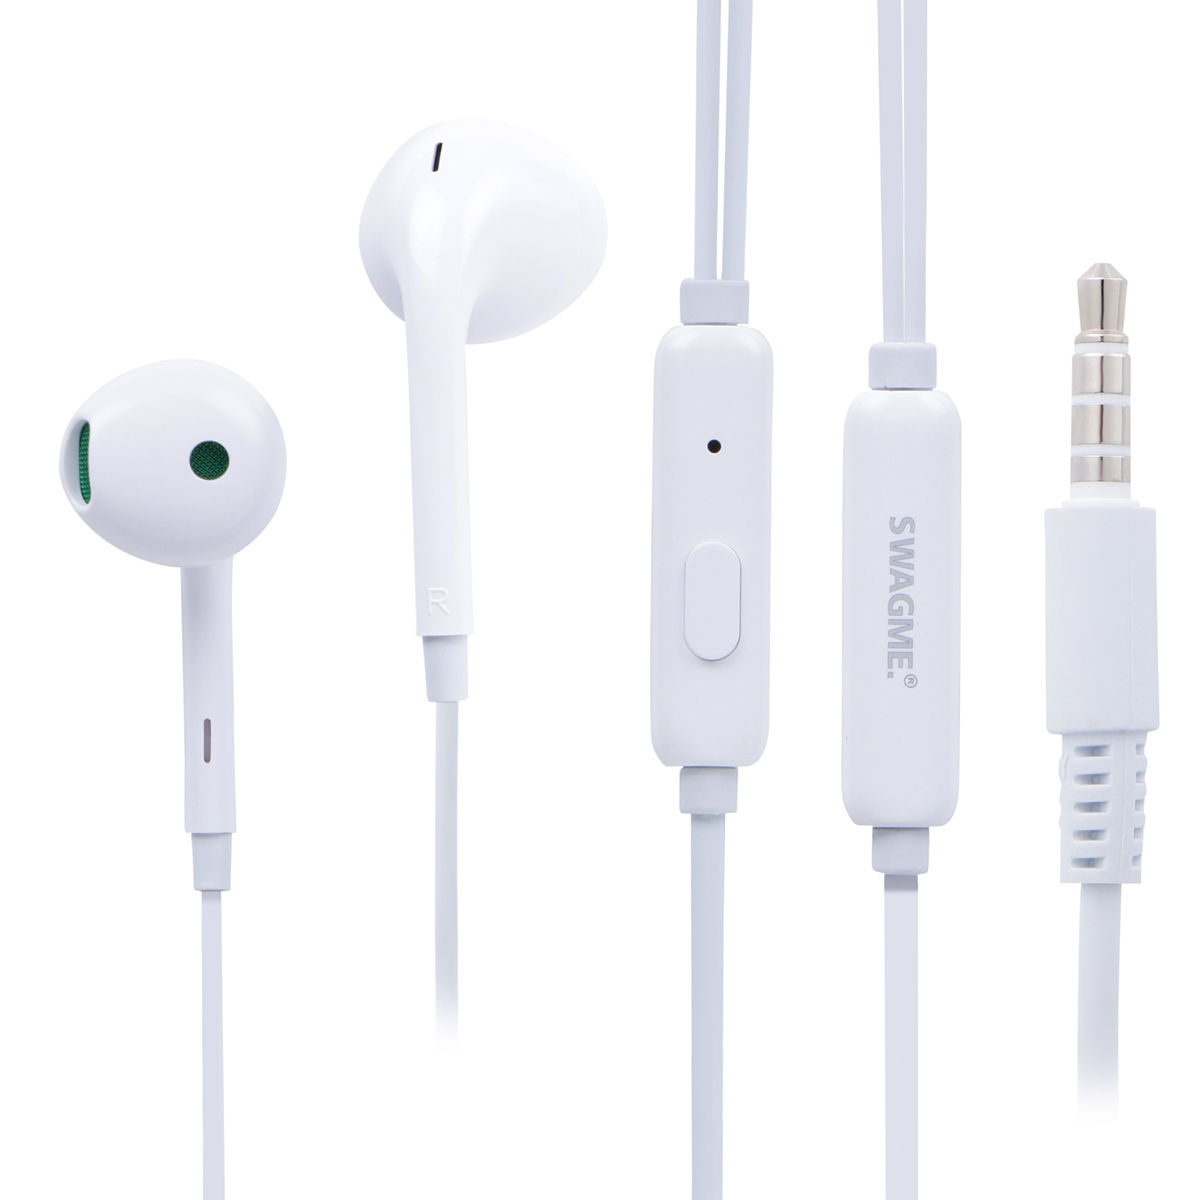 Swagme 14mm Bass IE007 in-Ear Wired Earphones with Mic (White)